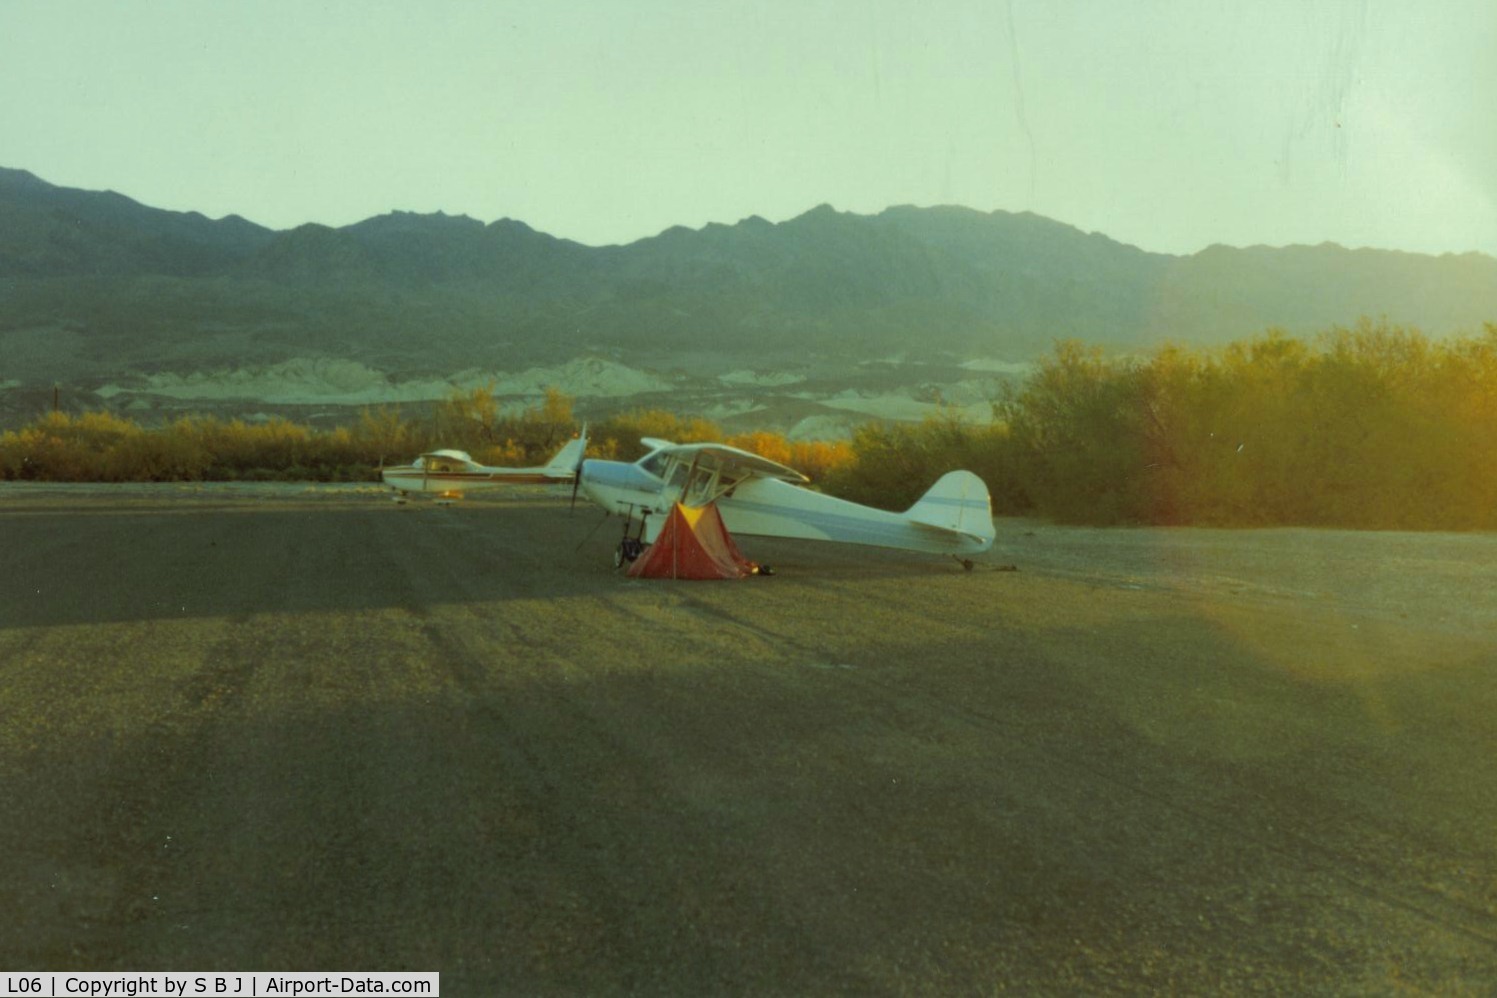 Furnace Creek Airport (L06) - 932 in the early morning light.My last camping at Furnace Ck due to Park Service change to no airport camping.Perhaps in the past it was no big deal and not enforced? I guess all good things come to an end...